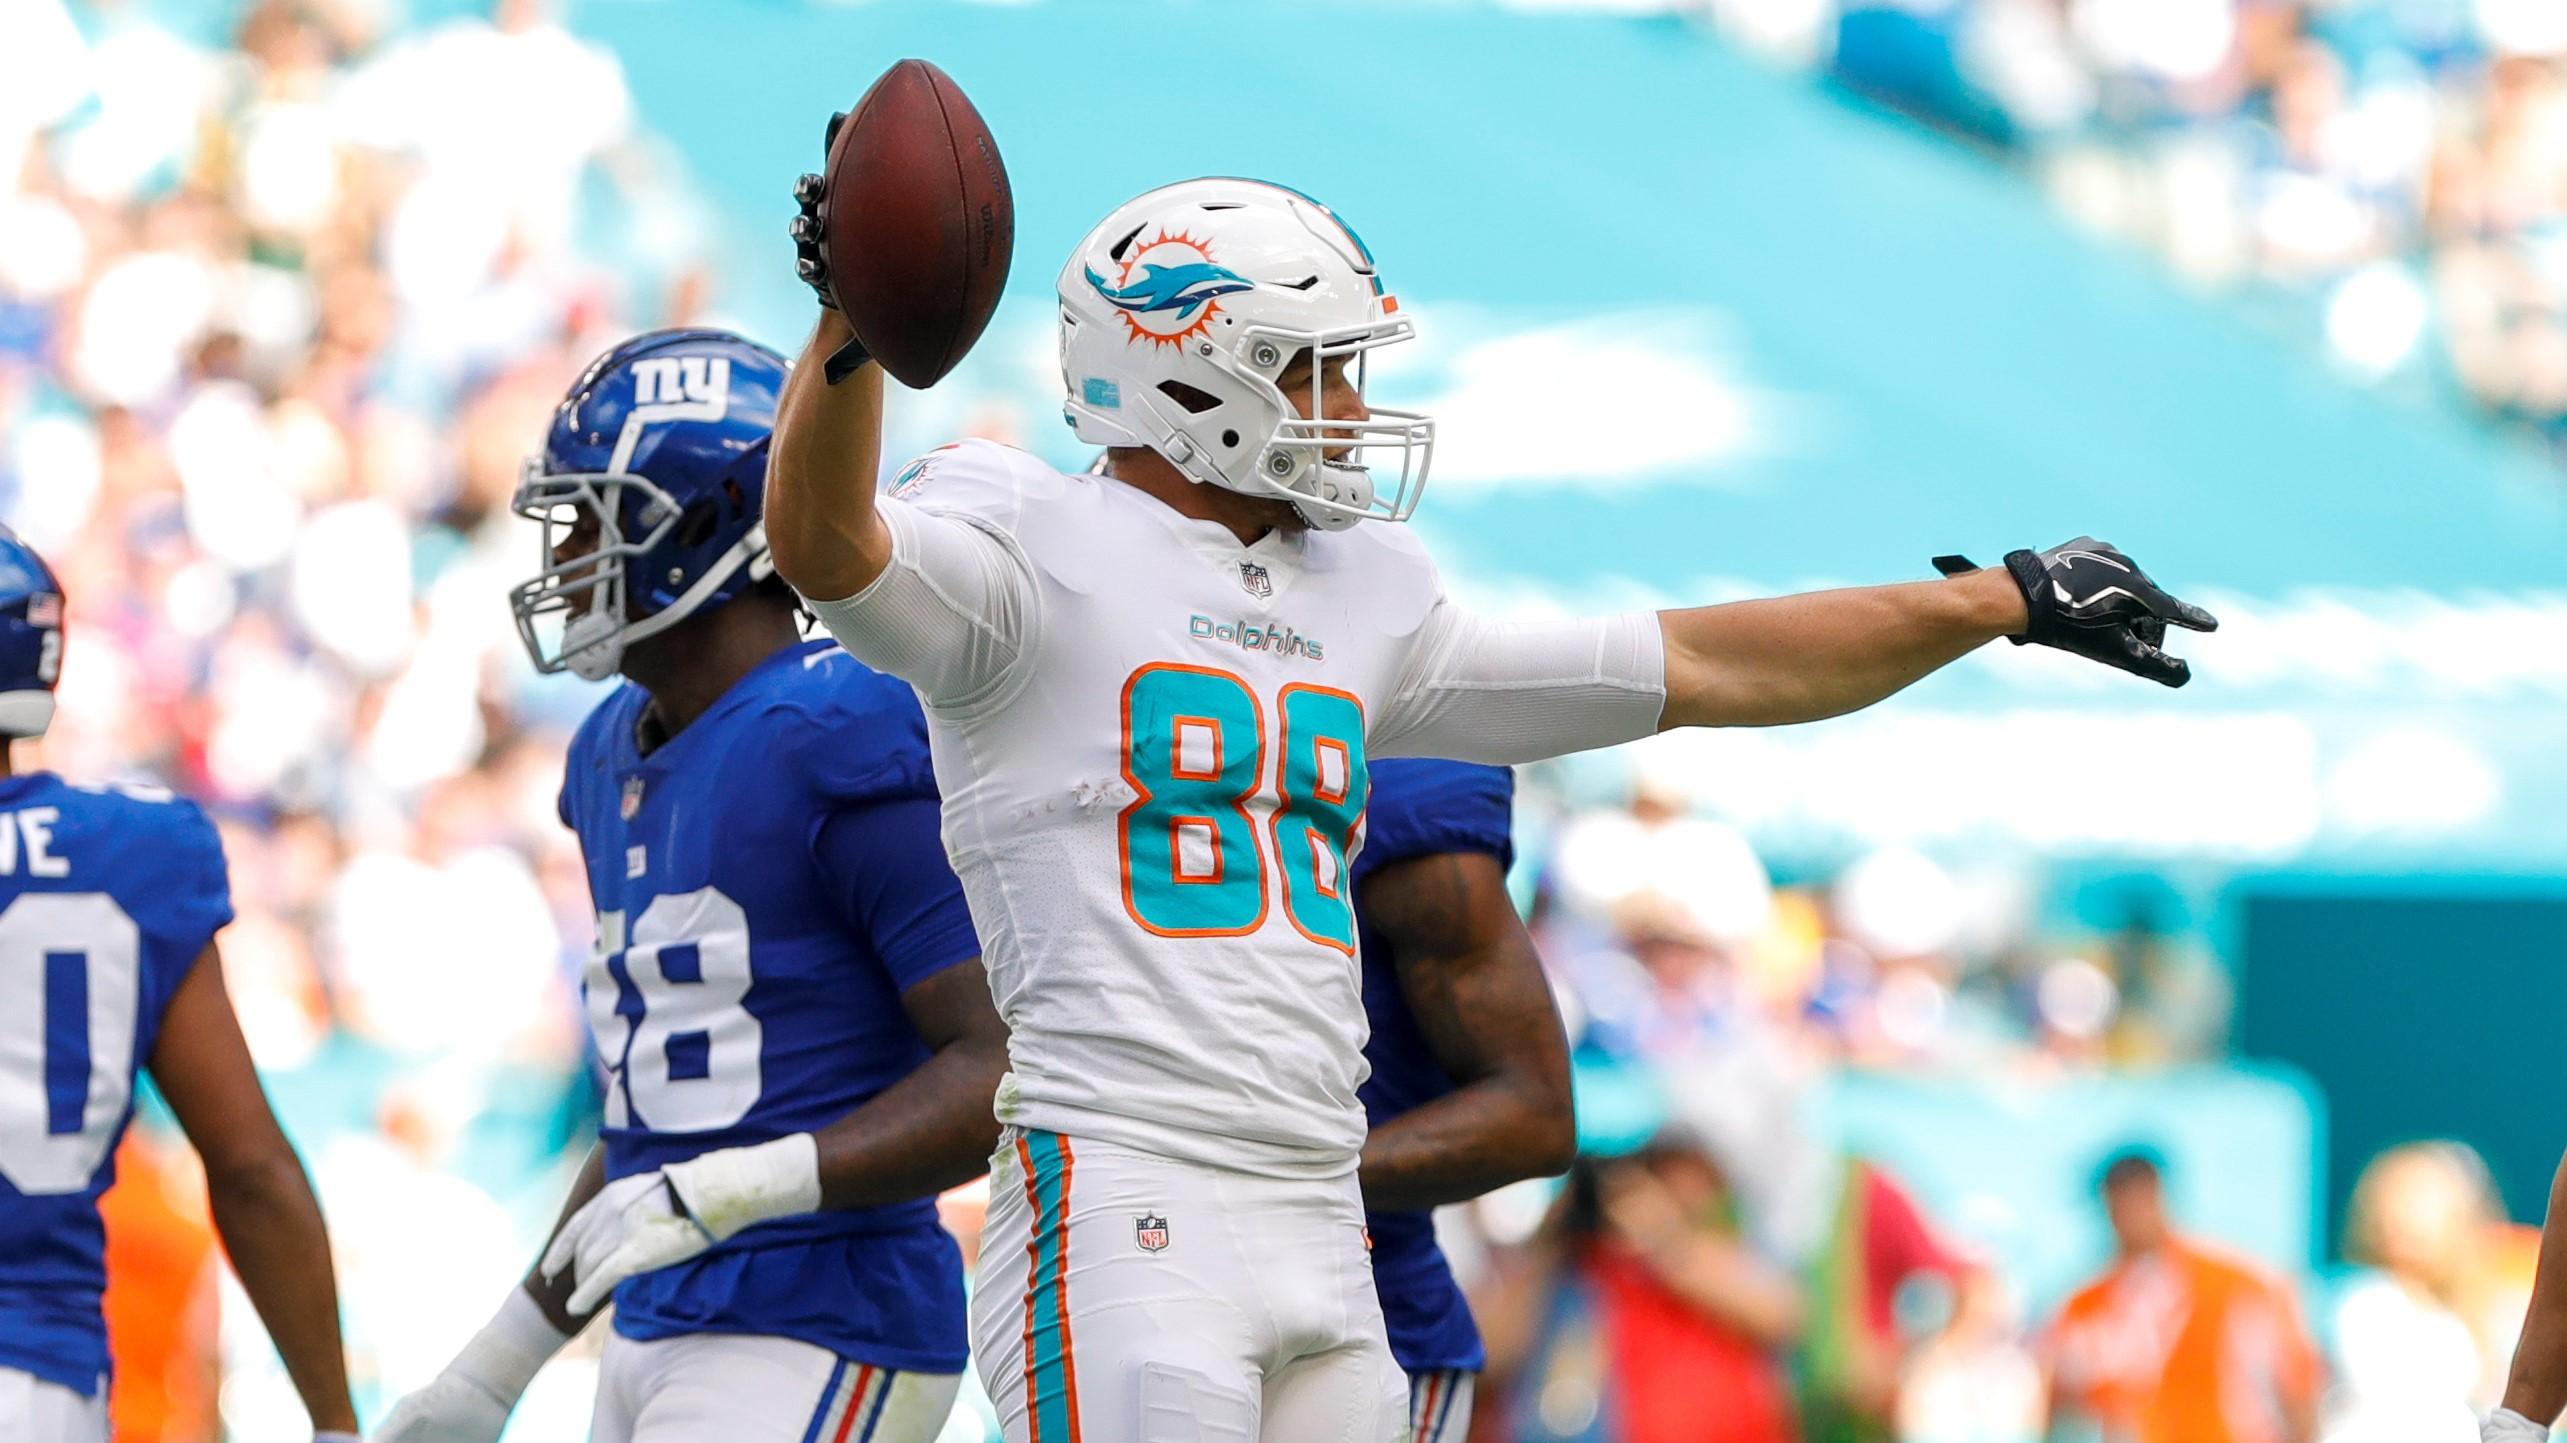 Dec 5, 2021; Miami Gardens, Florida, USA; Miami Dolphins tight end Mike Gesicki (88) reacts after making a catch against the New York Giants during the first half at Hard Rock Stadium. Mandatory Credit: Sam Navarro-USA TODAY Sports / Sam Navarro-USA TODAY Sports